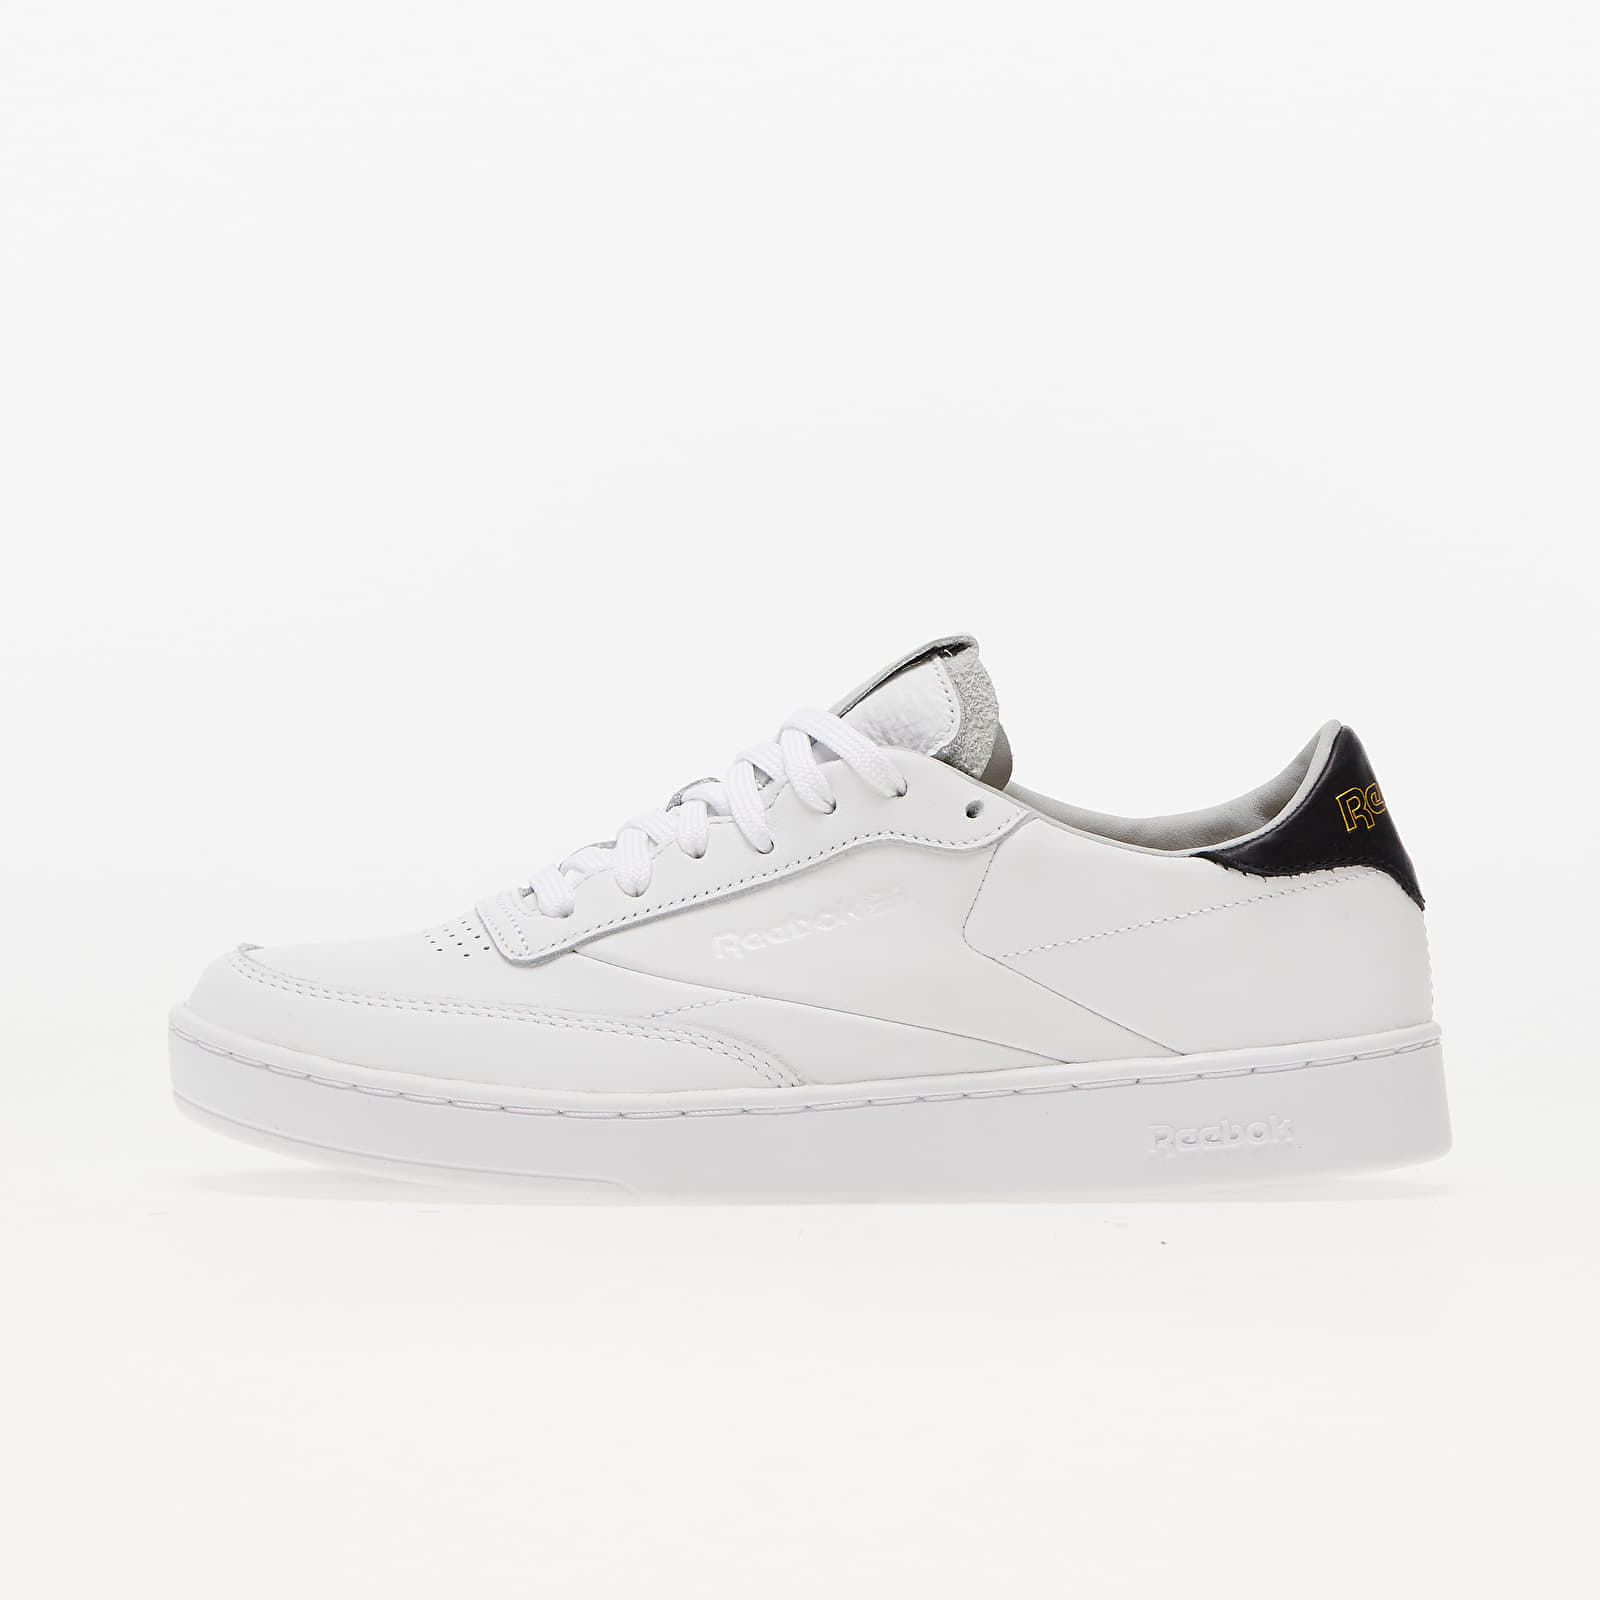 Men's sneakers and shoes Reebok Club C Clean Ftw White/ Ftw White/ Core Black